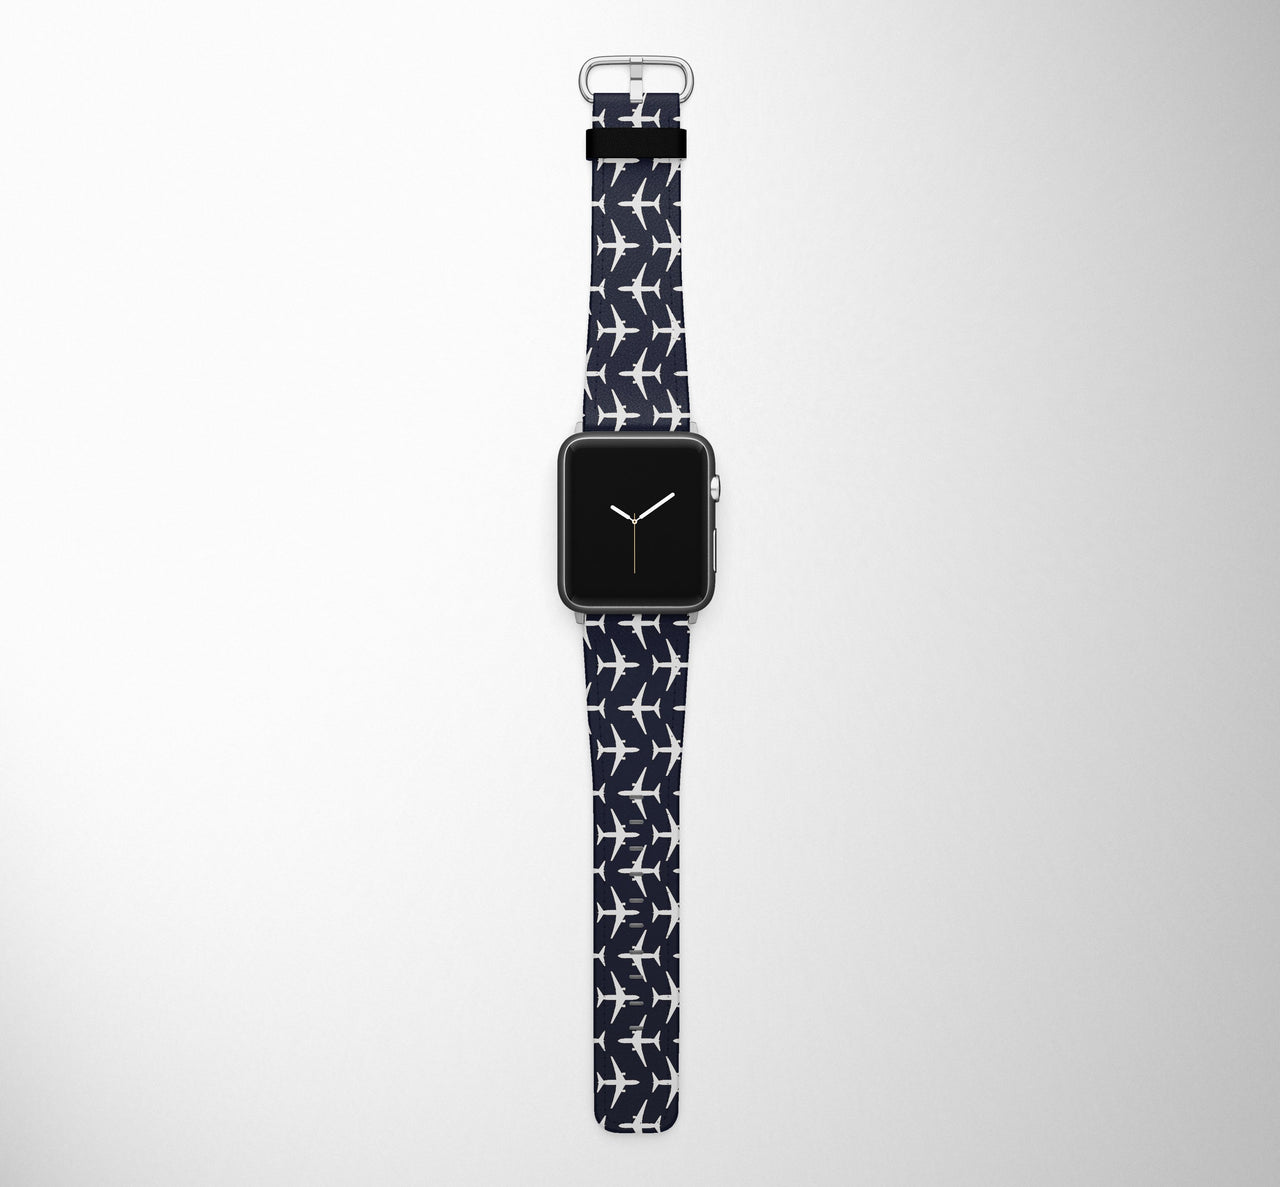 Perfectly Sized Seamless Airplanes Designed Leather Apple Watch Straps